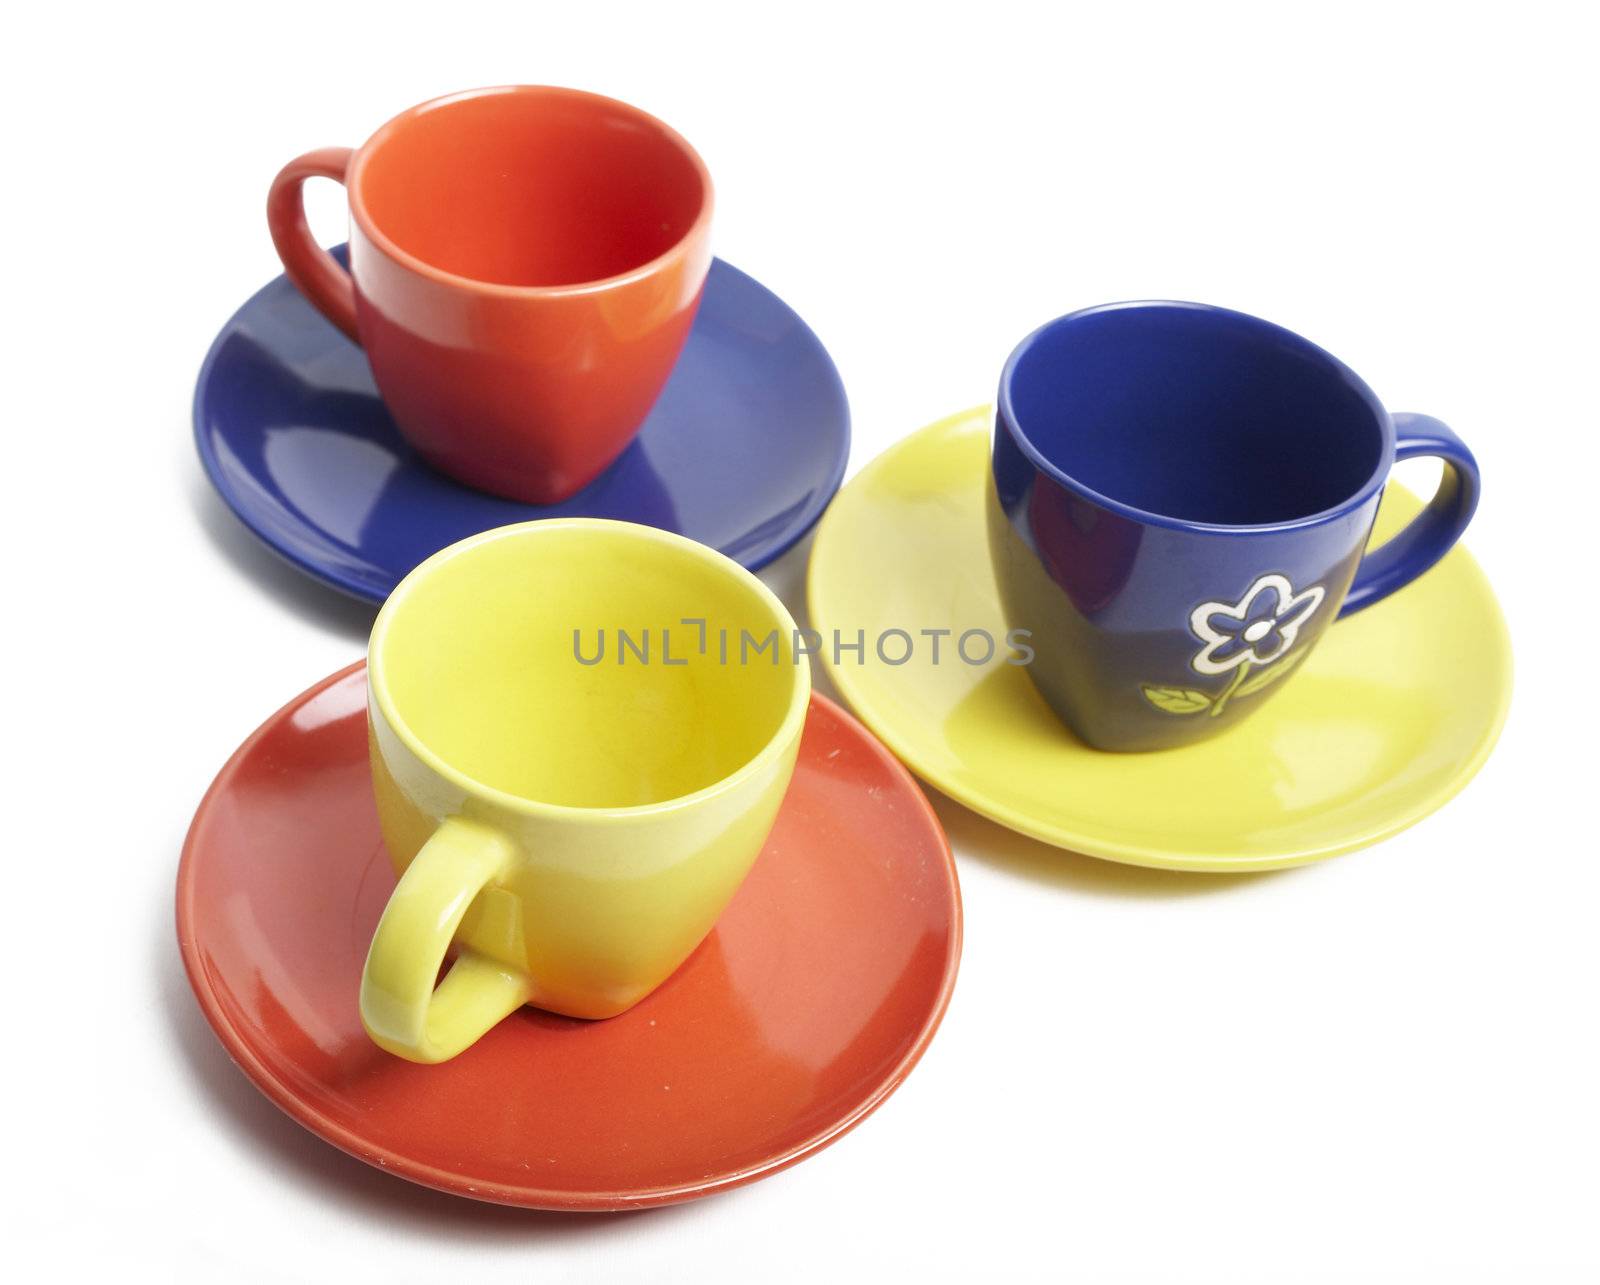 Cups by velkol